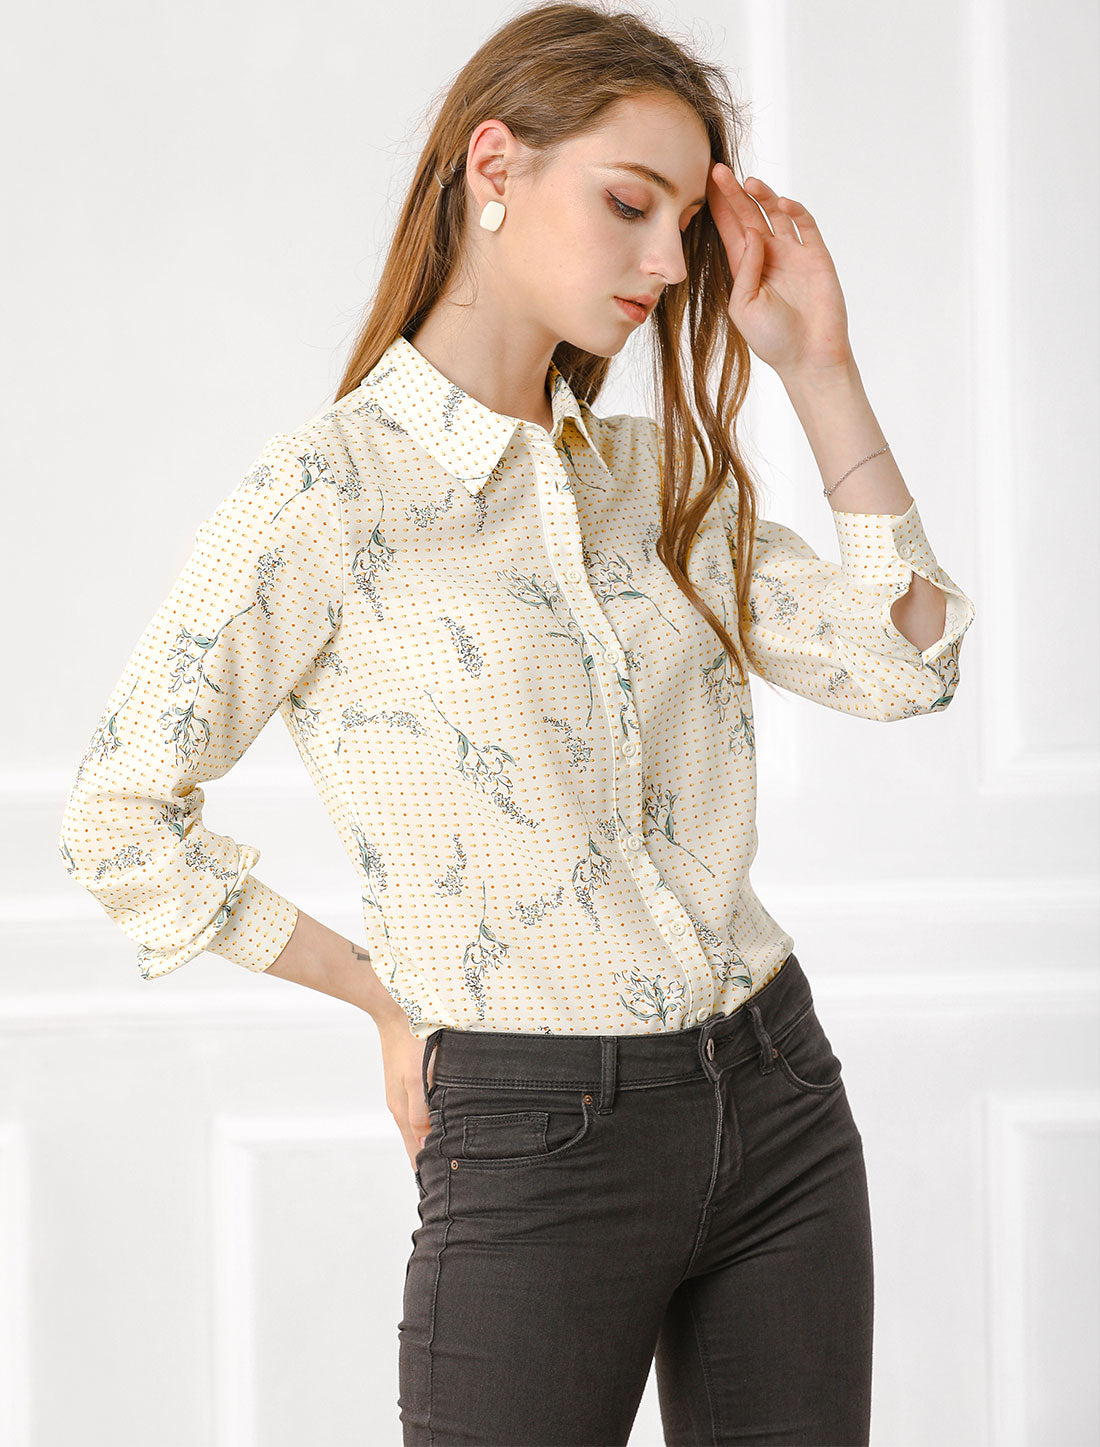 Allegra K Floral Dots Blouse Tie Neck Casual Office Shirt